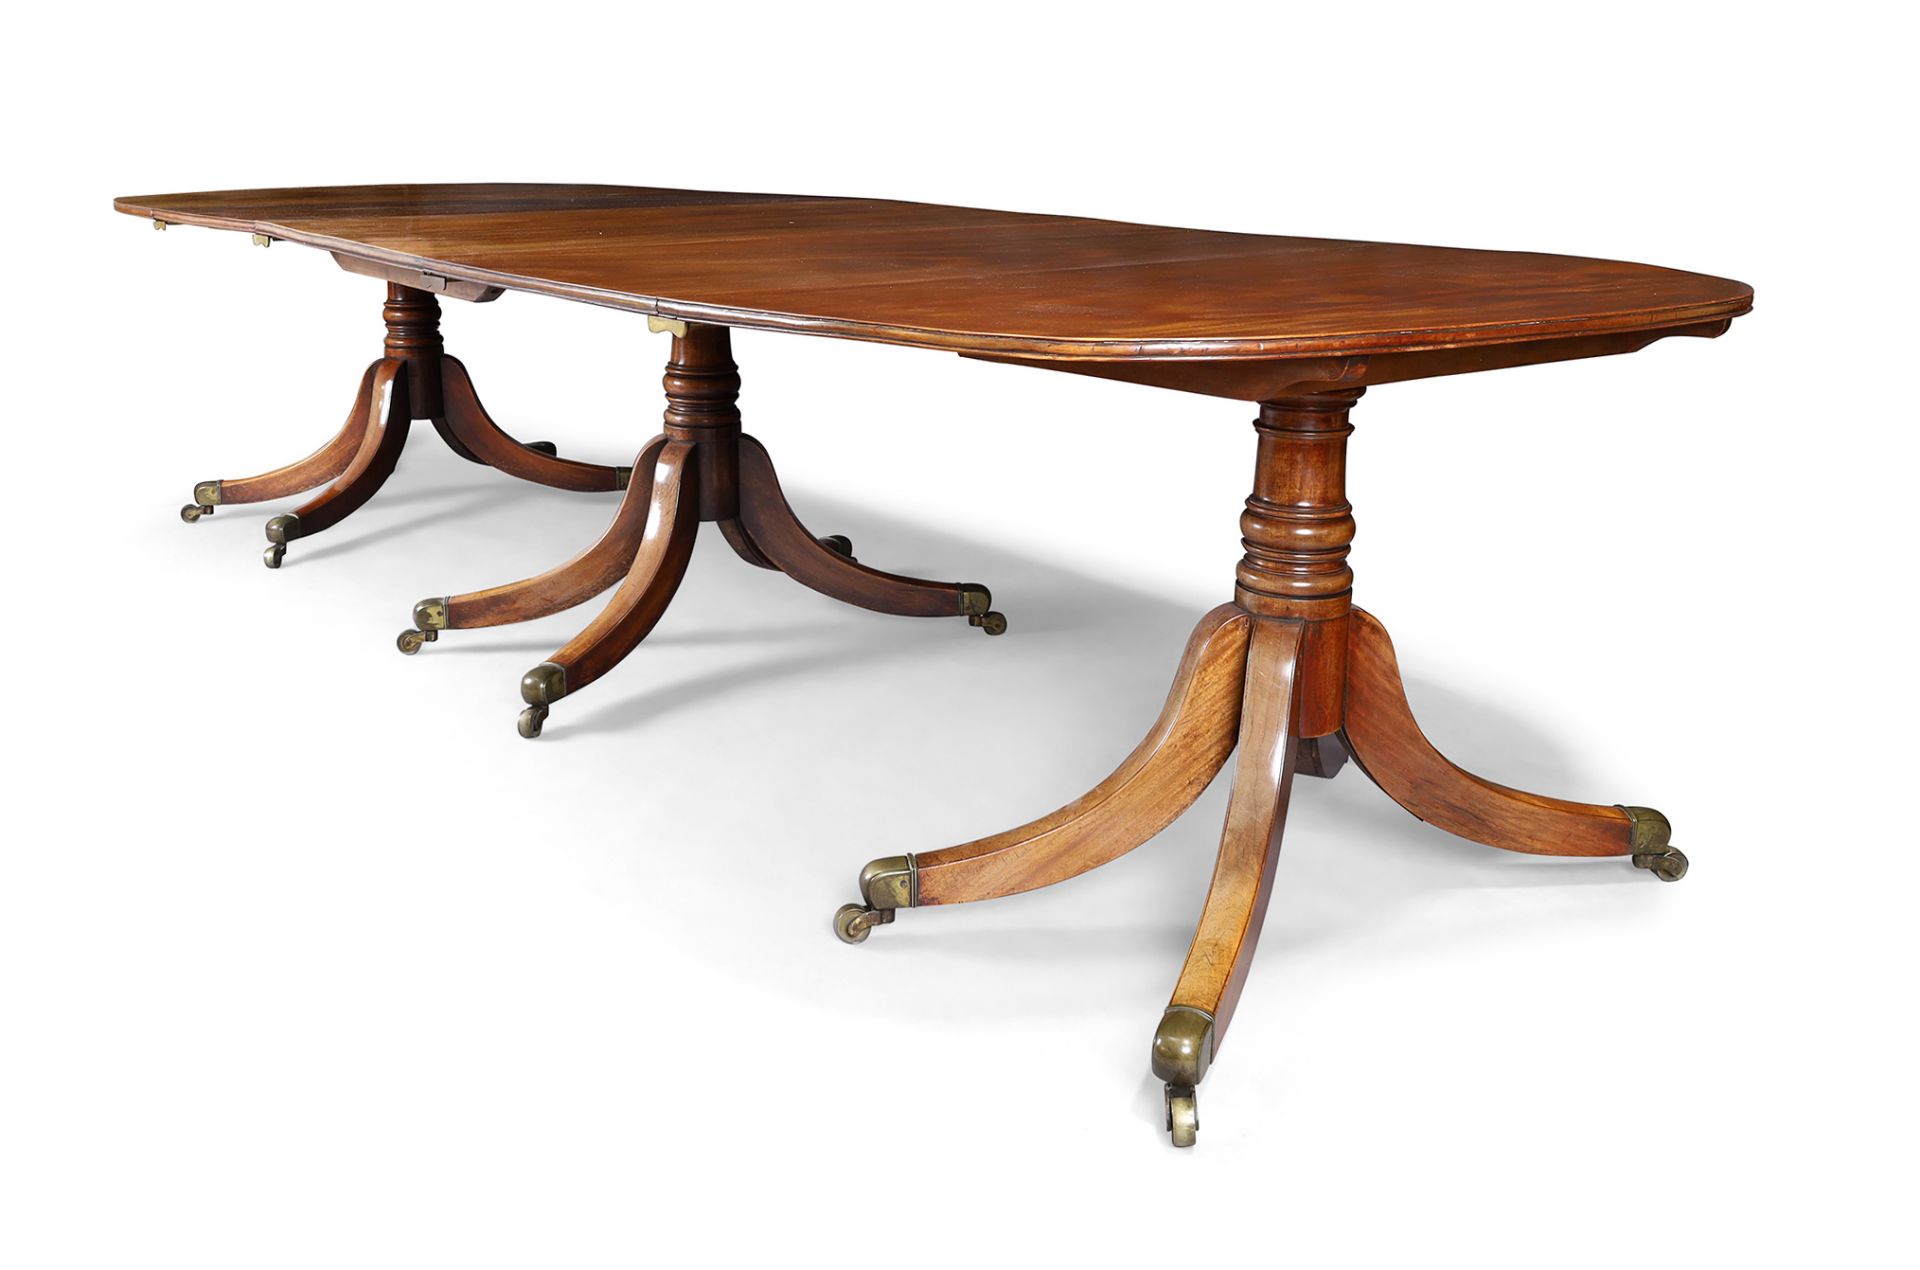 A George III mahogany dining table, last quarter 18th century, the three pedestals with turned co...